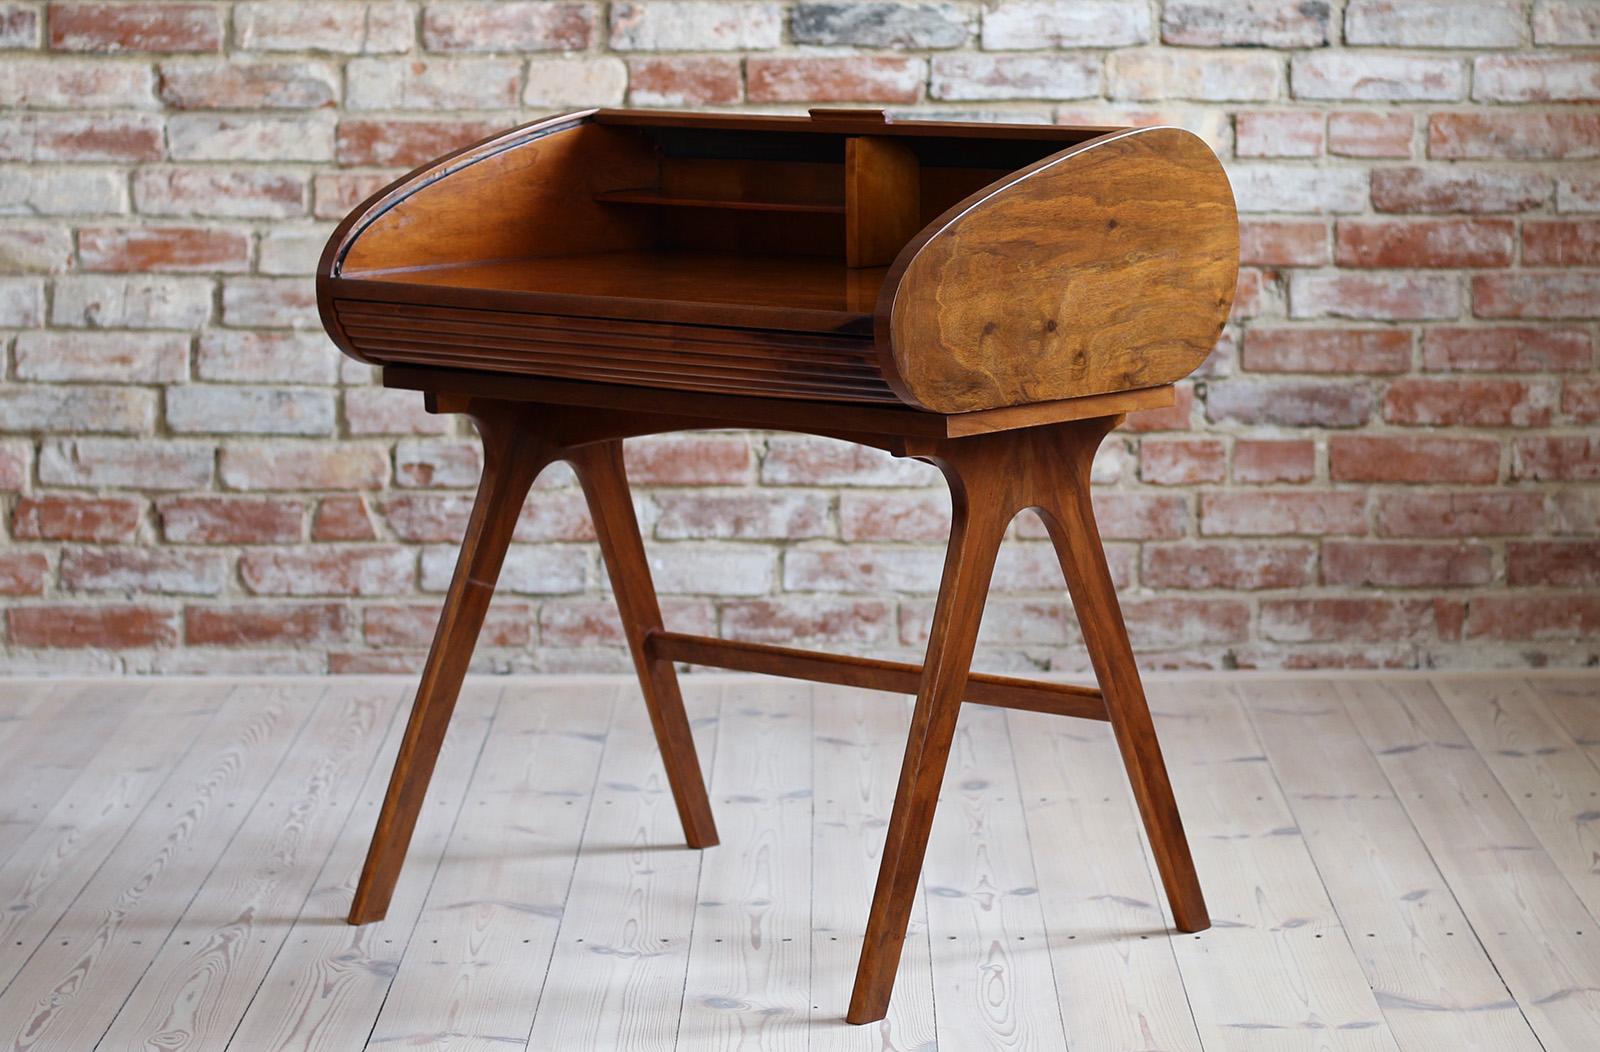 Rare Mid-Century Modern Desk with Roll-Top, Walnut Veneer, 1950s, Fully Restored In Good Condition In Wrocław, Poland